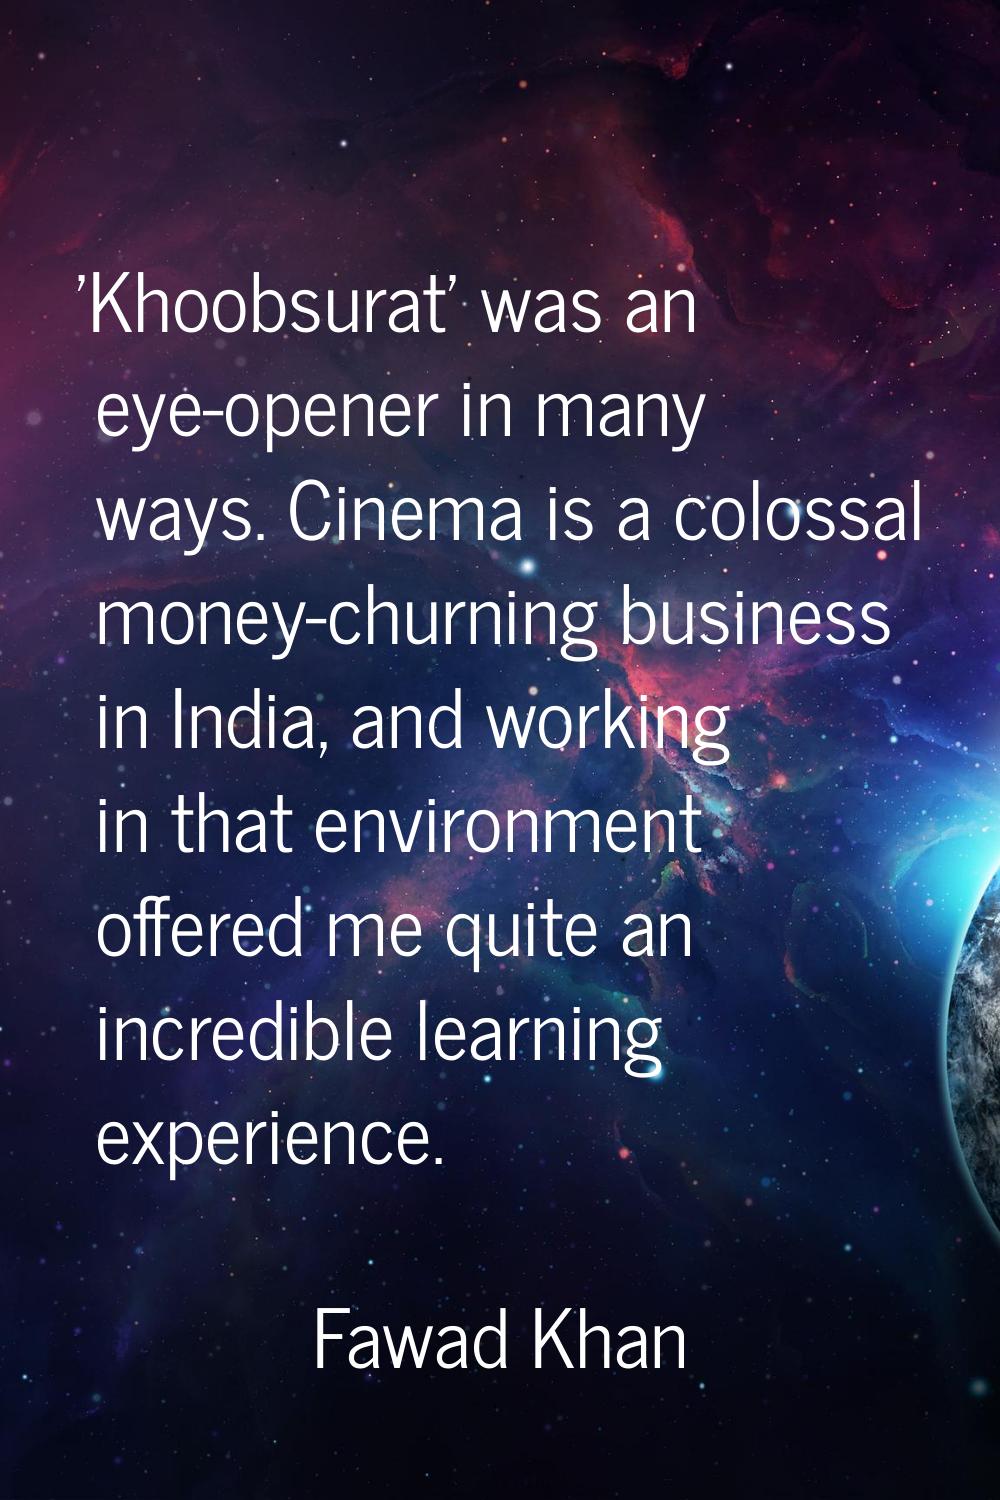 'Khoobsurat' was an eye-opener in many ways. Cinema is a colossal money-churning business in India,